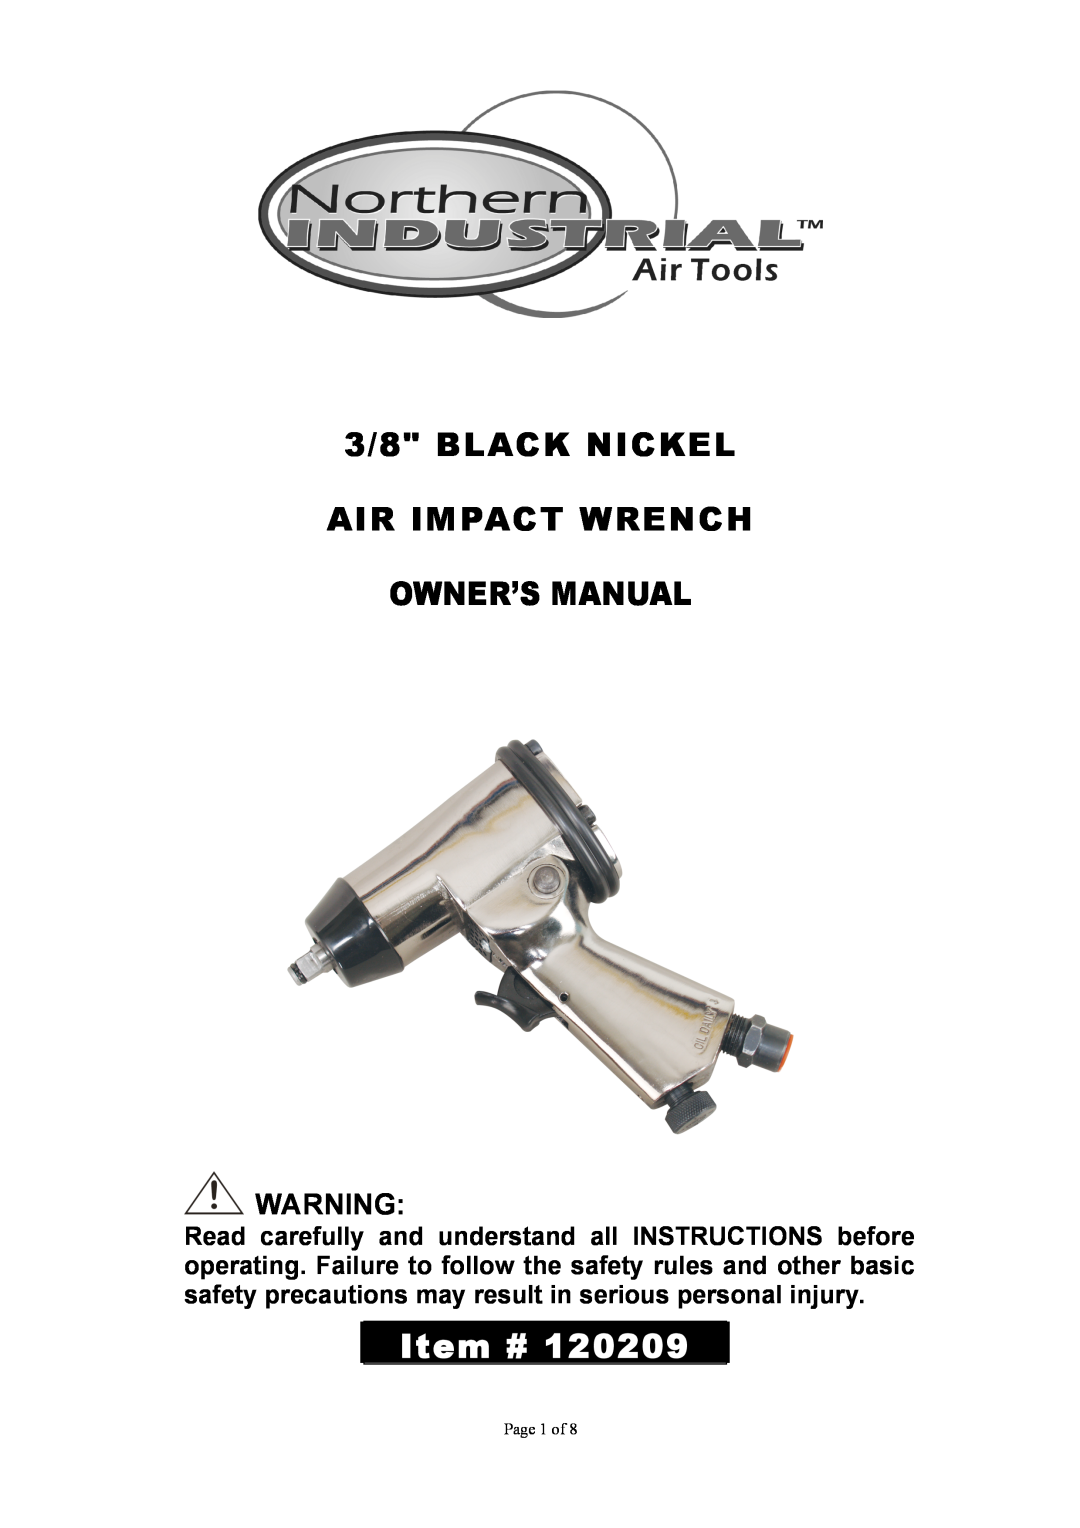 Northern Industrial Tools NORTHERN INDUSTRIAL BLACK NICKEL AIR IMPACT WRENCH owner manual Item #, Page 1 of 